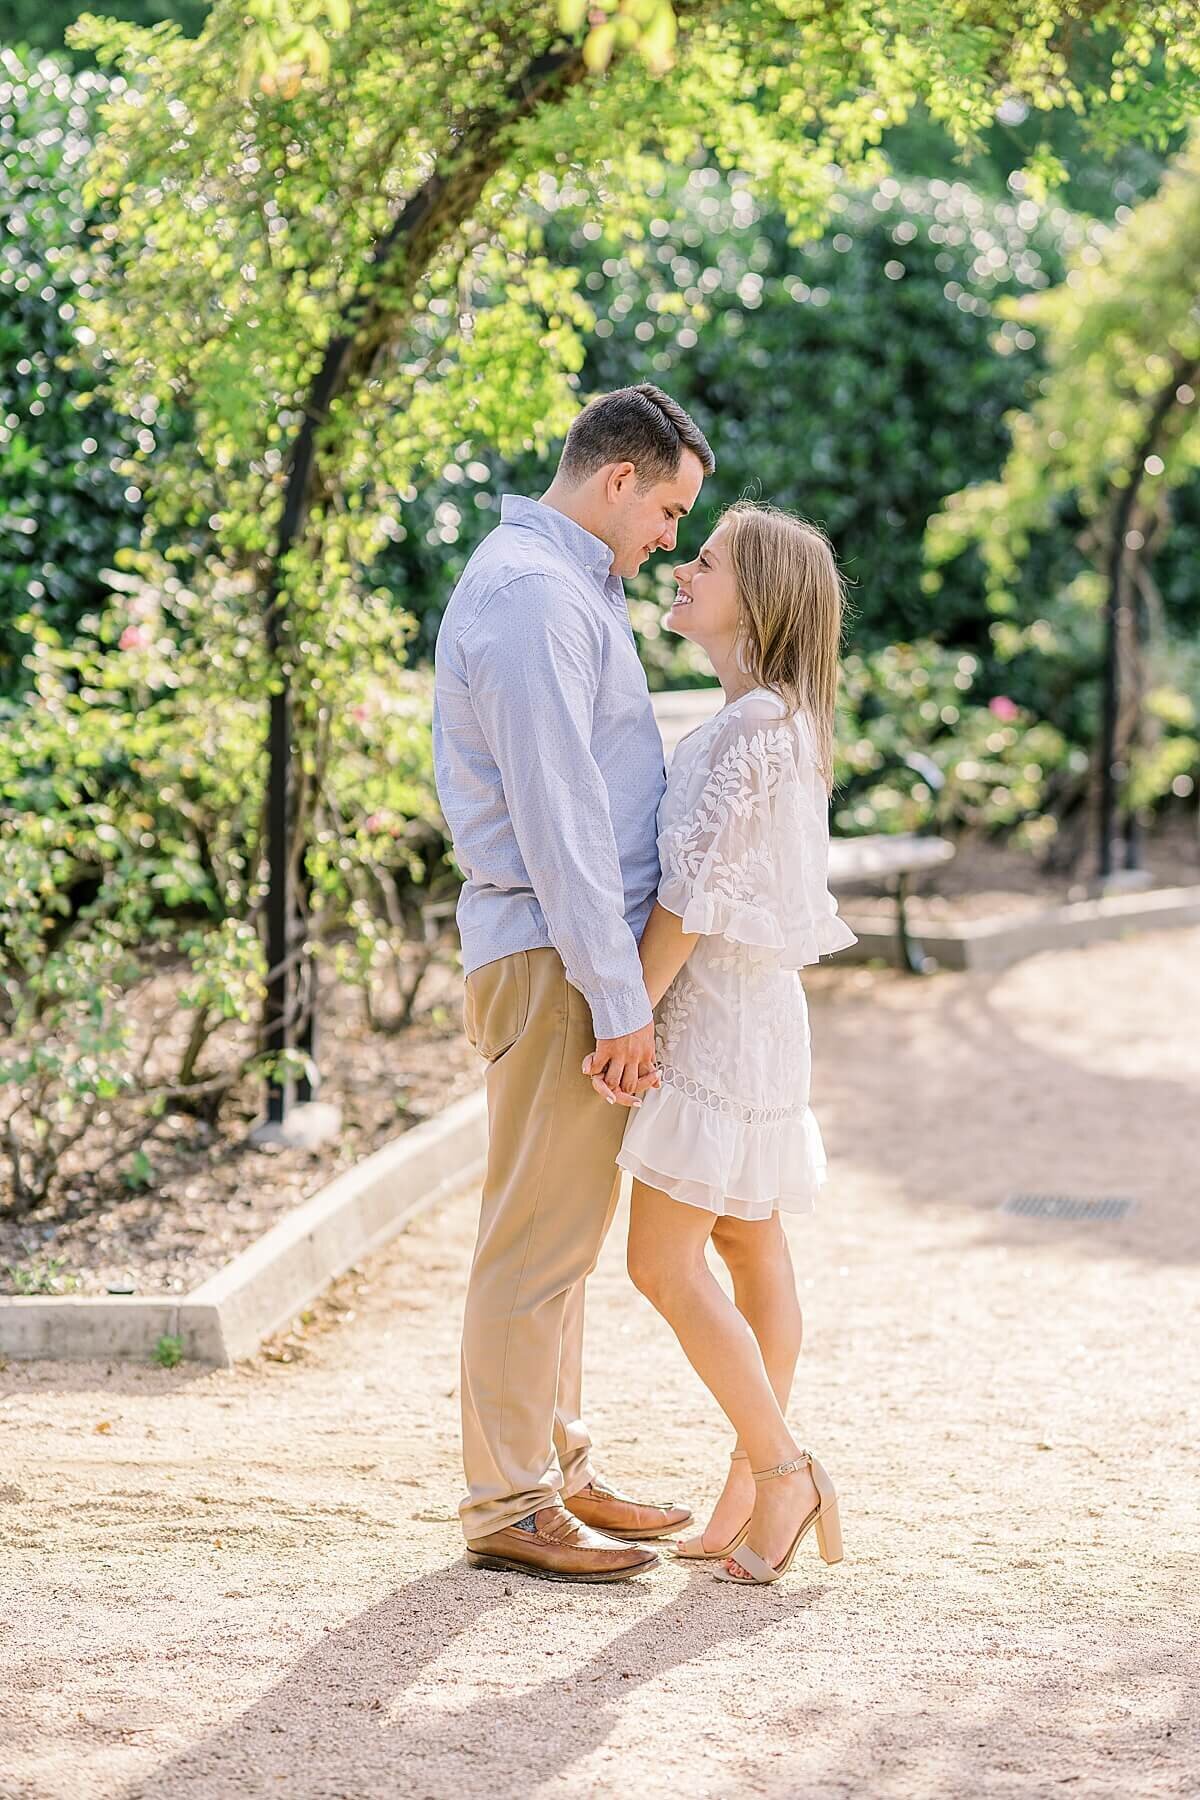 McGovern-Centennial-Gardens-Hermann-Park-Engagement-Session-Alicia-Yarrish-Photography_0045